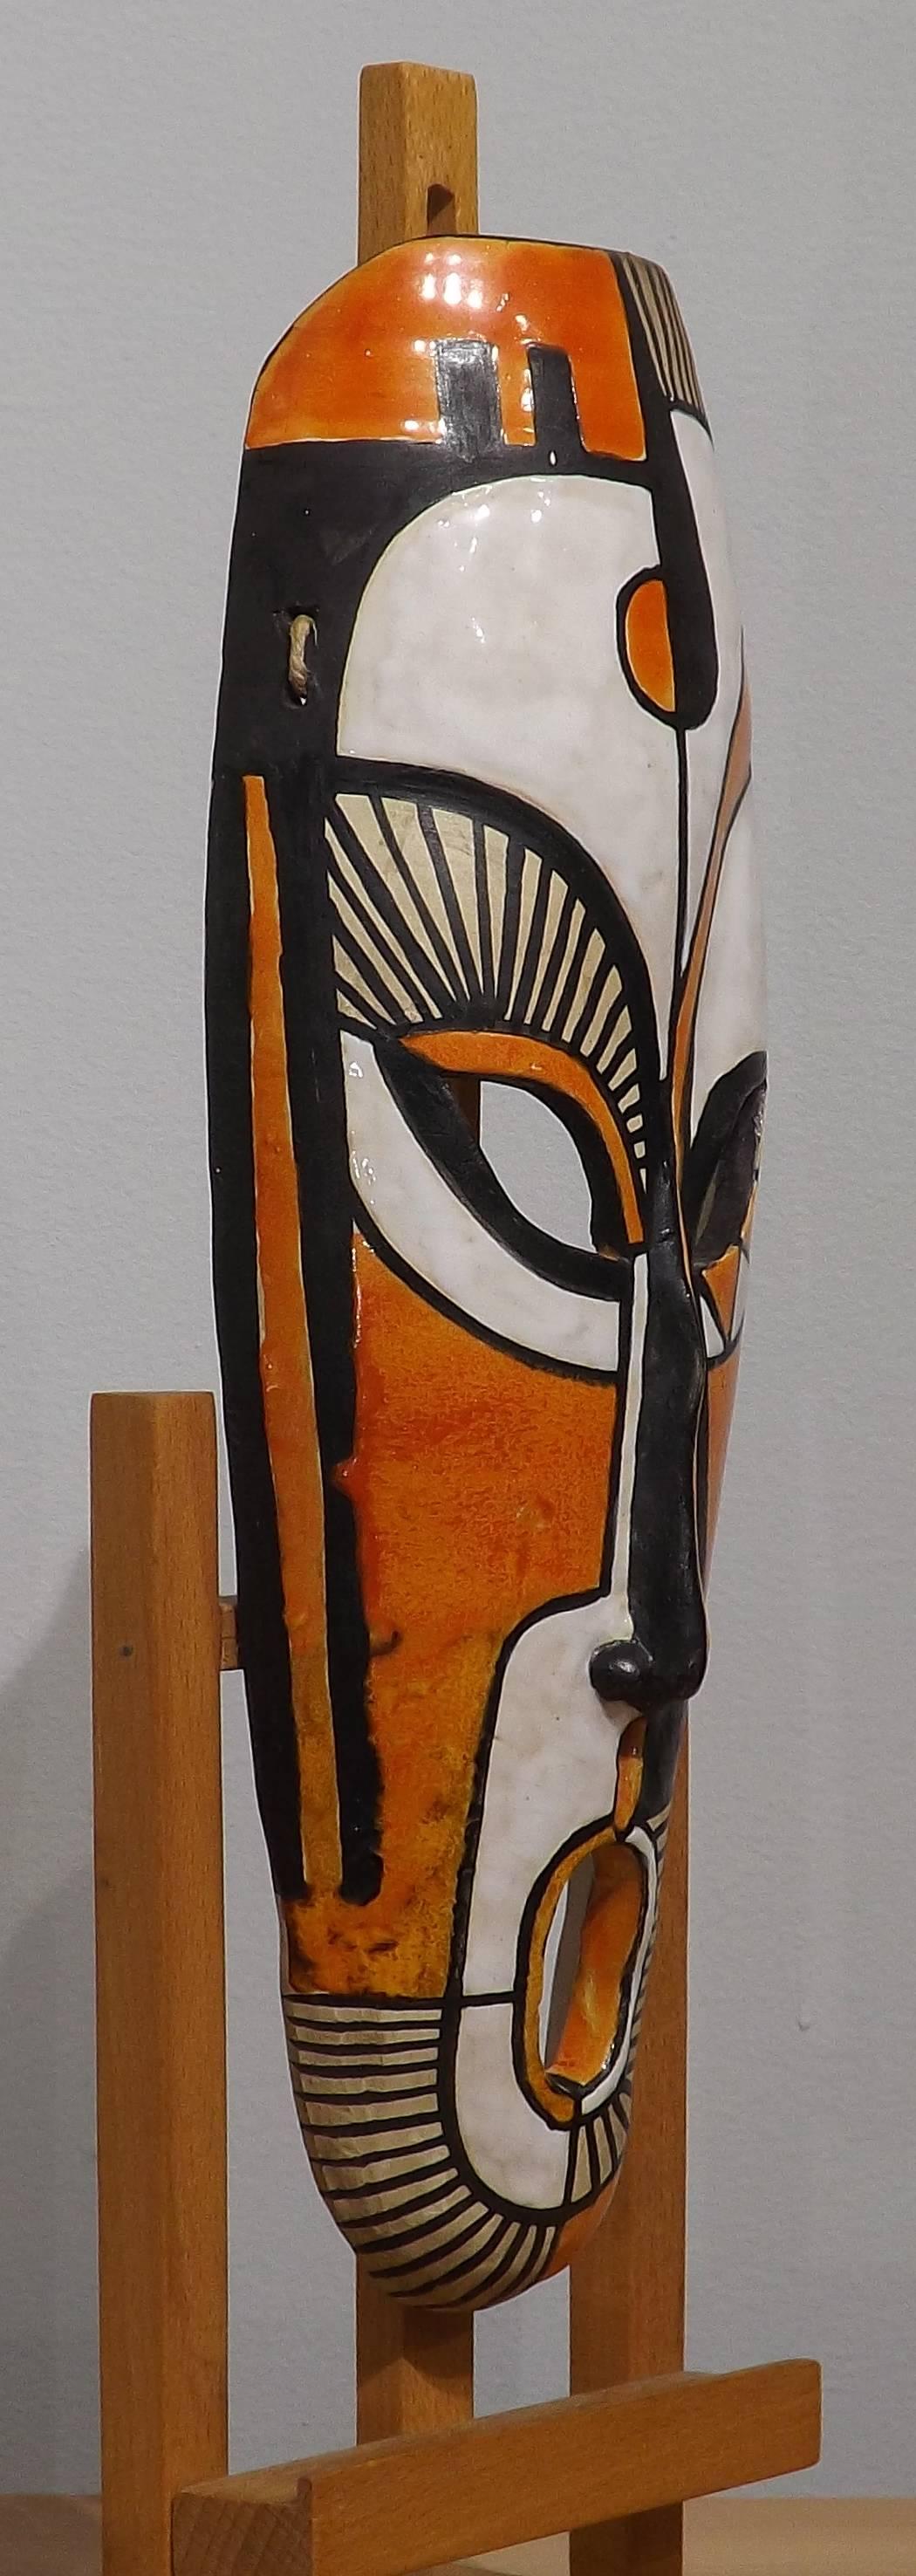 An African mask made of pottery, decorated in abstract patterns in white, black and white. Dated 1955 and initialized 'GL'. Most likely of French origin.